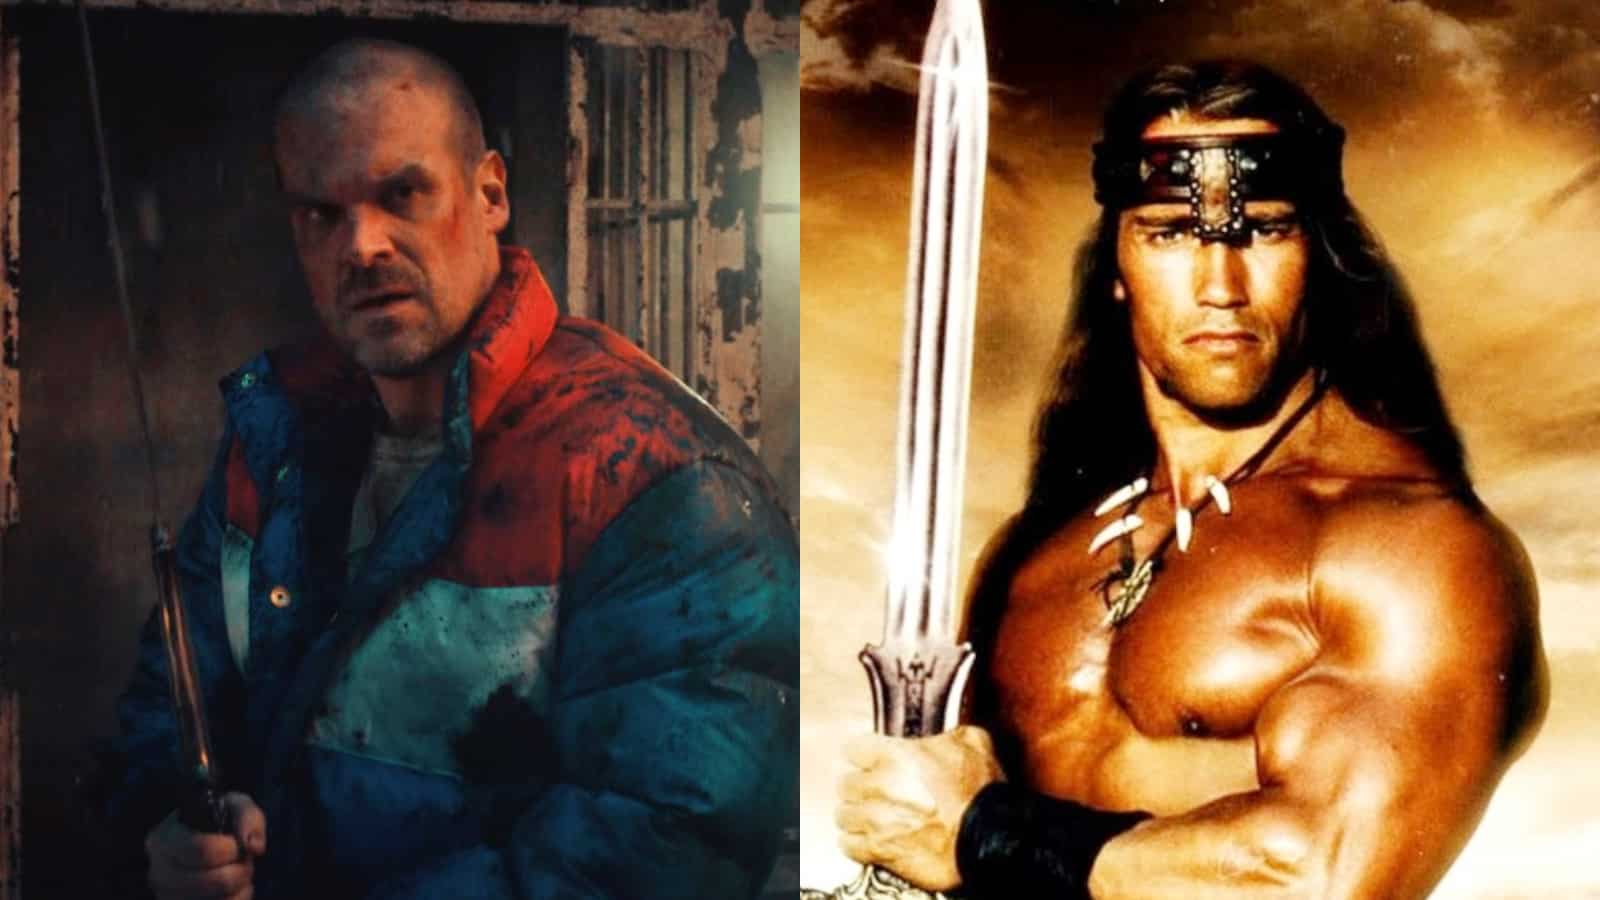 David Harbour holding a sword in Stranger Things Season 4 and Arnold Schwarzenegger holding a sword in Conan the Barbarian. Together, they add up a great Stranger Things easter egg.